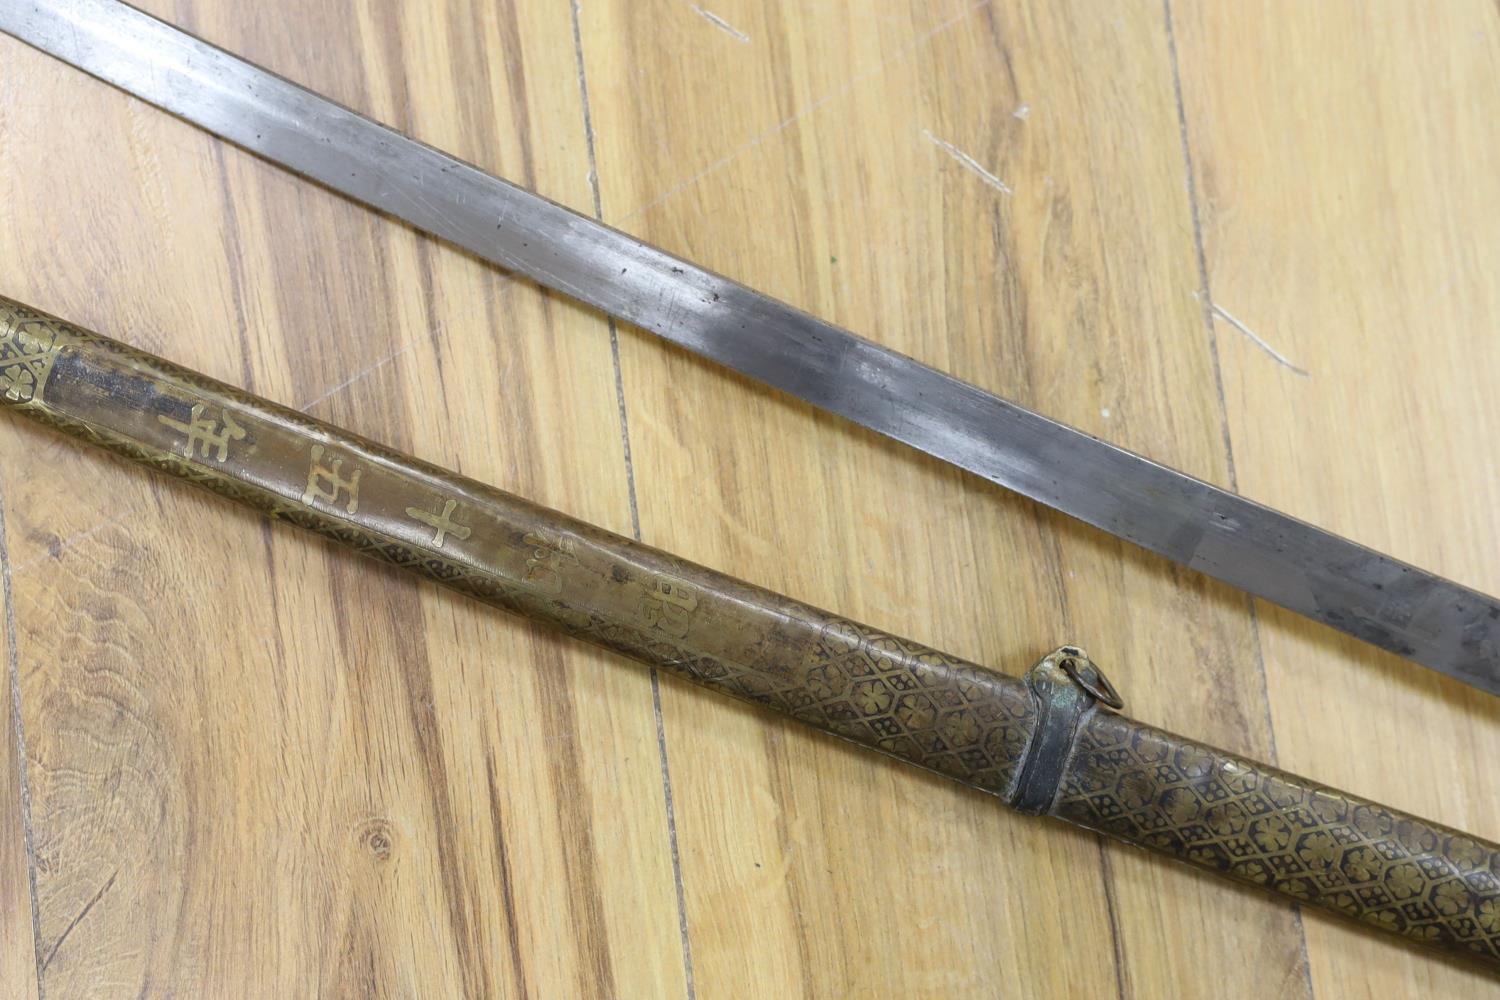 A Chinese sword, single edged blade 64cm, in etched brass scabbard - Image 6 of 7